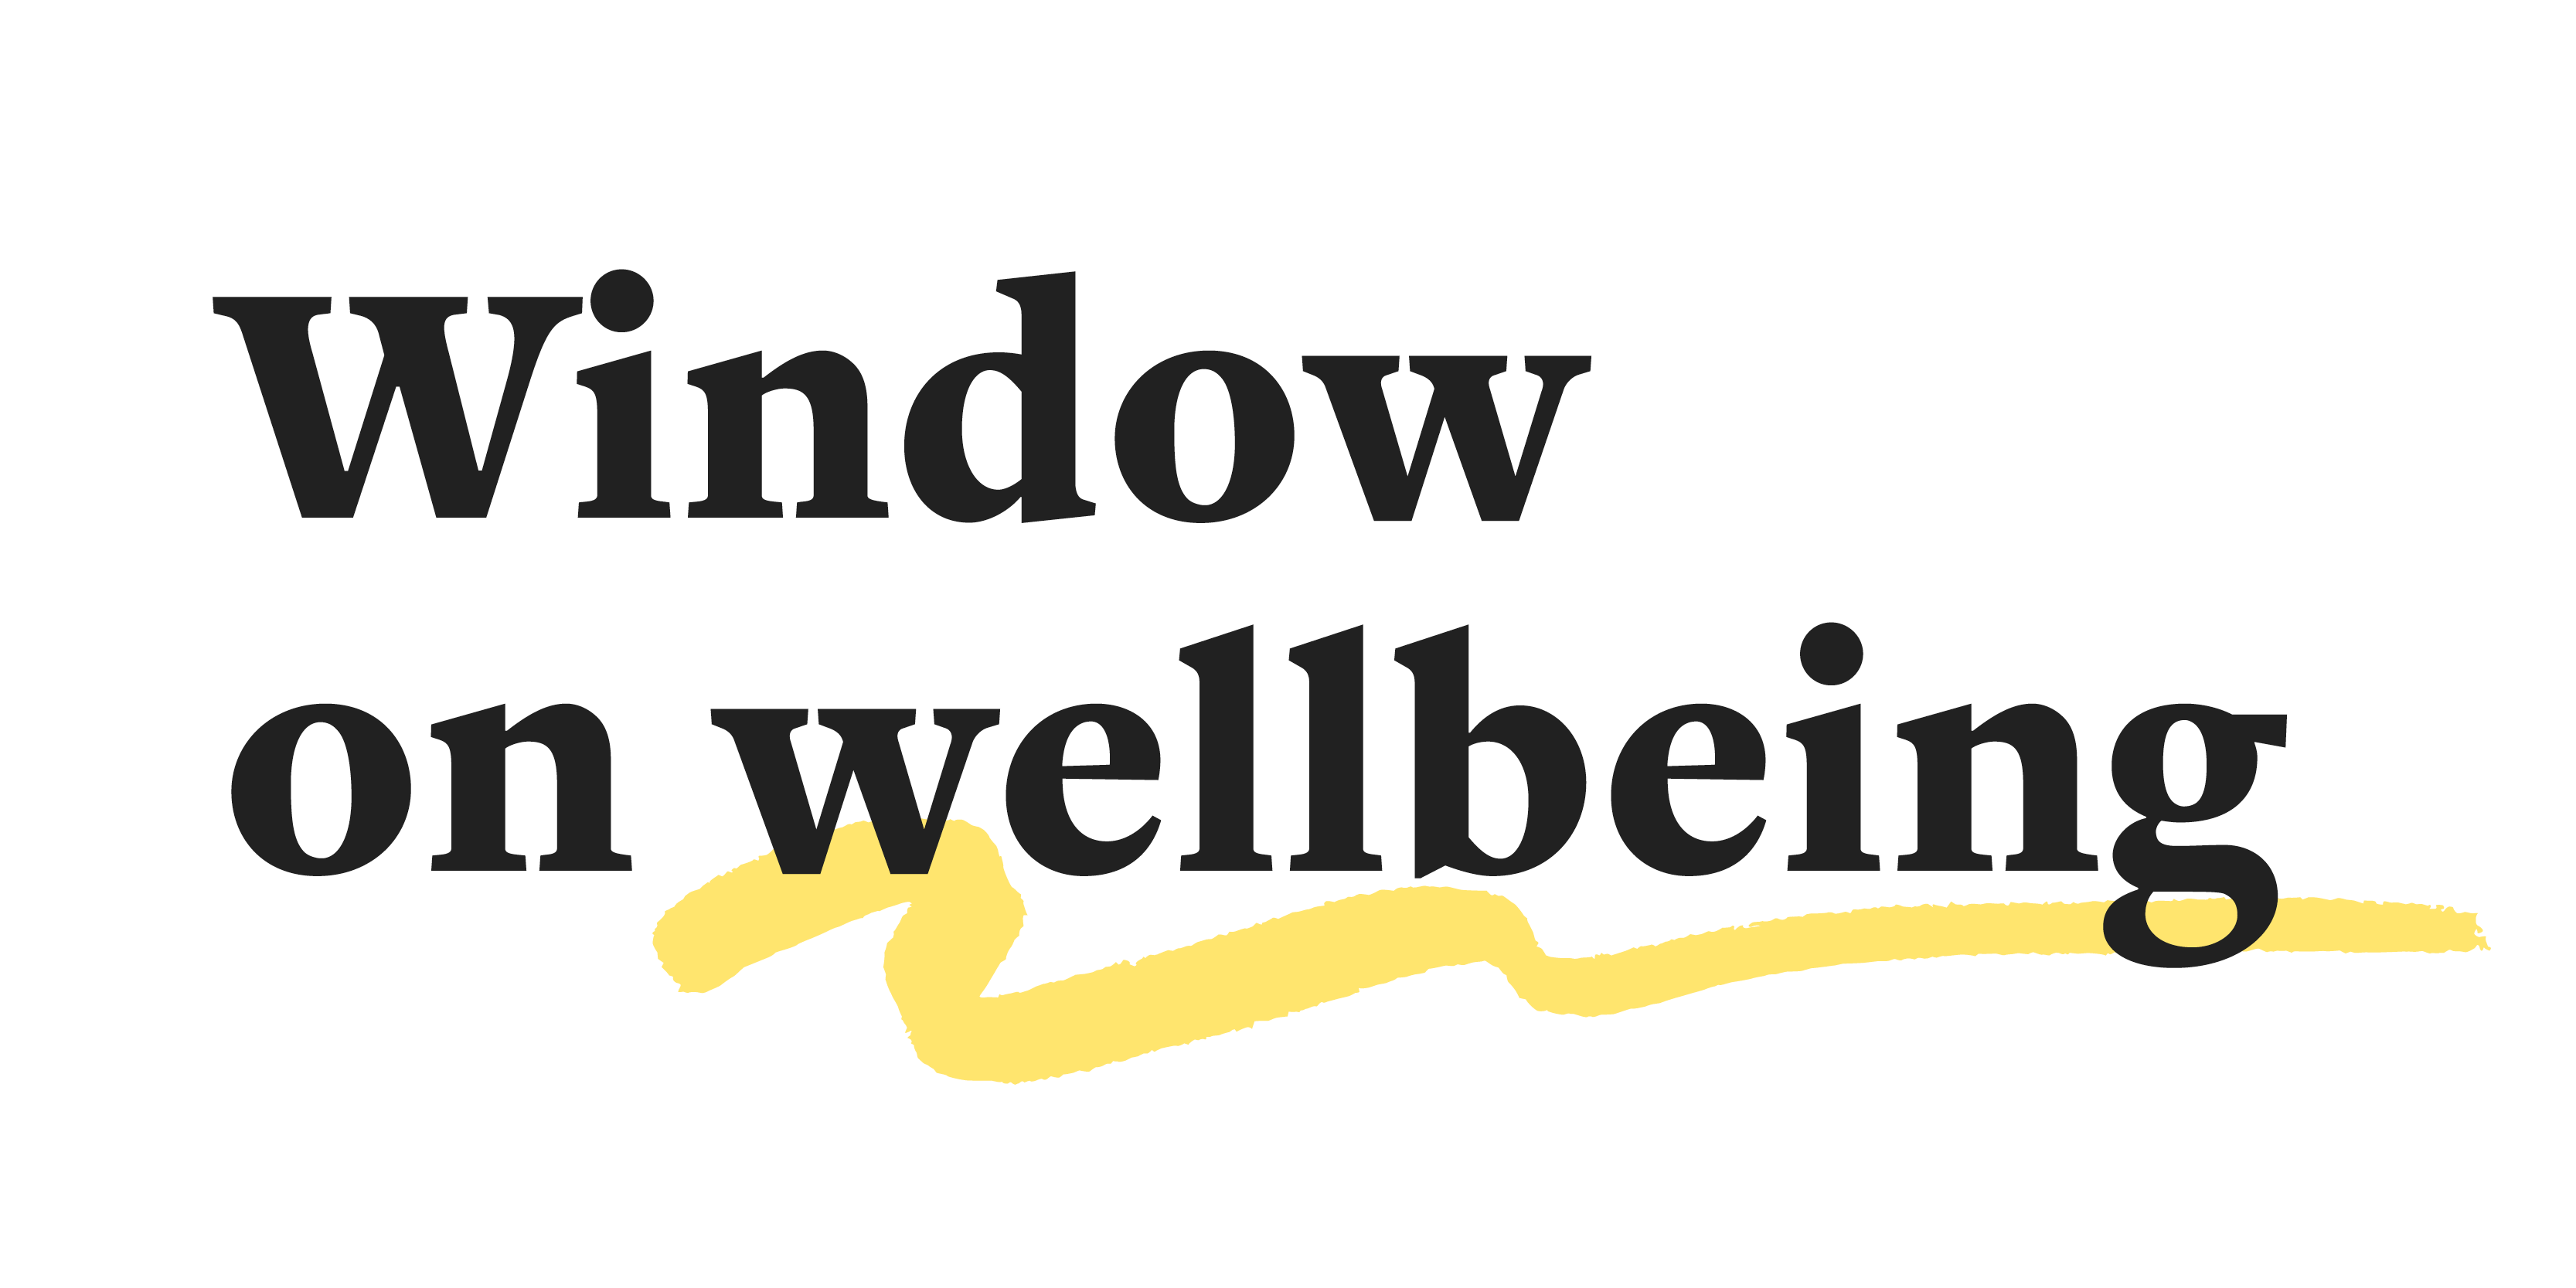 Window on Wellbeing logo - black text on a white background with a yellow underscore